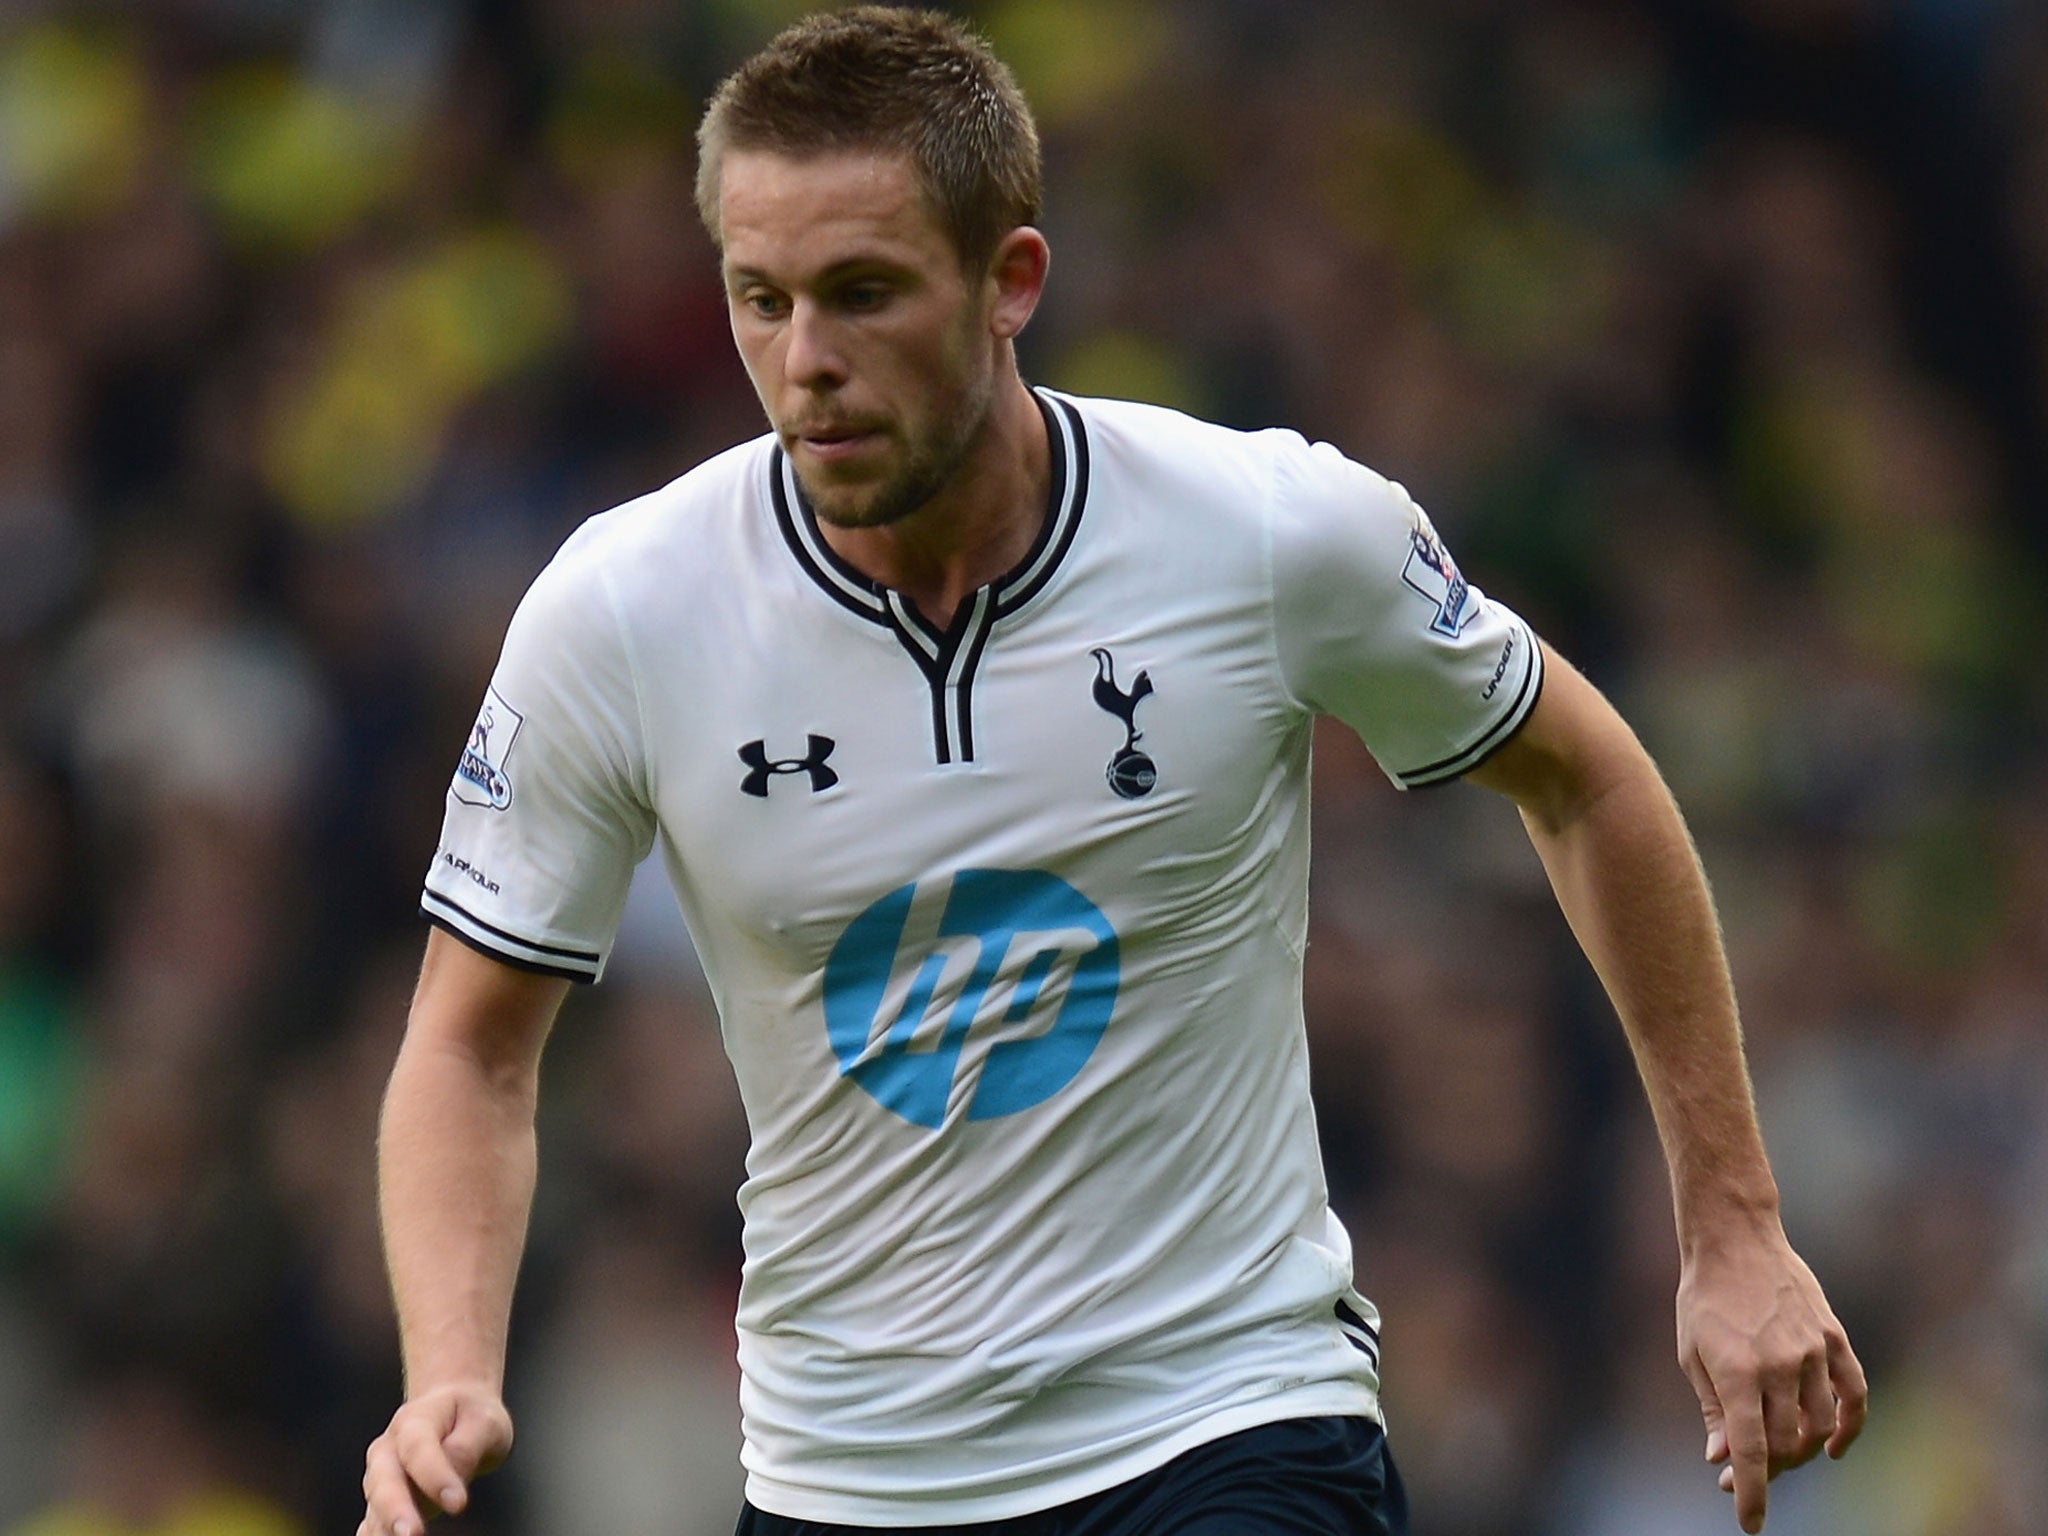 Tottenham Hotspur, featuring Gyfli Sigurdsson, have had the most shots in the Premier League this season, with 76